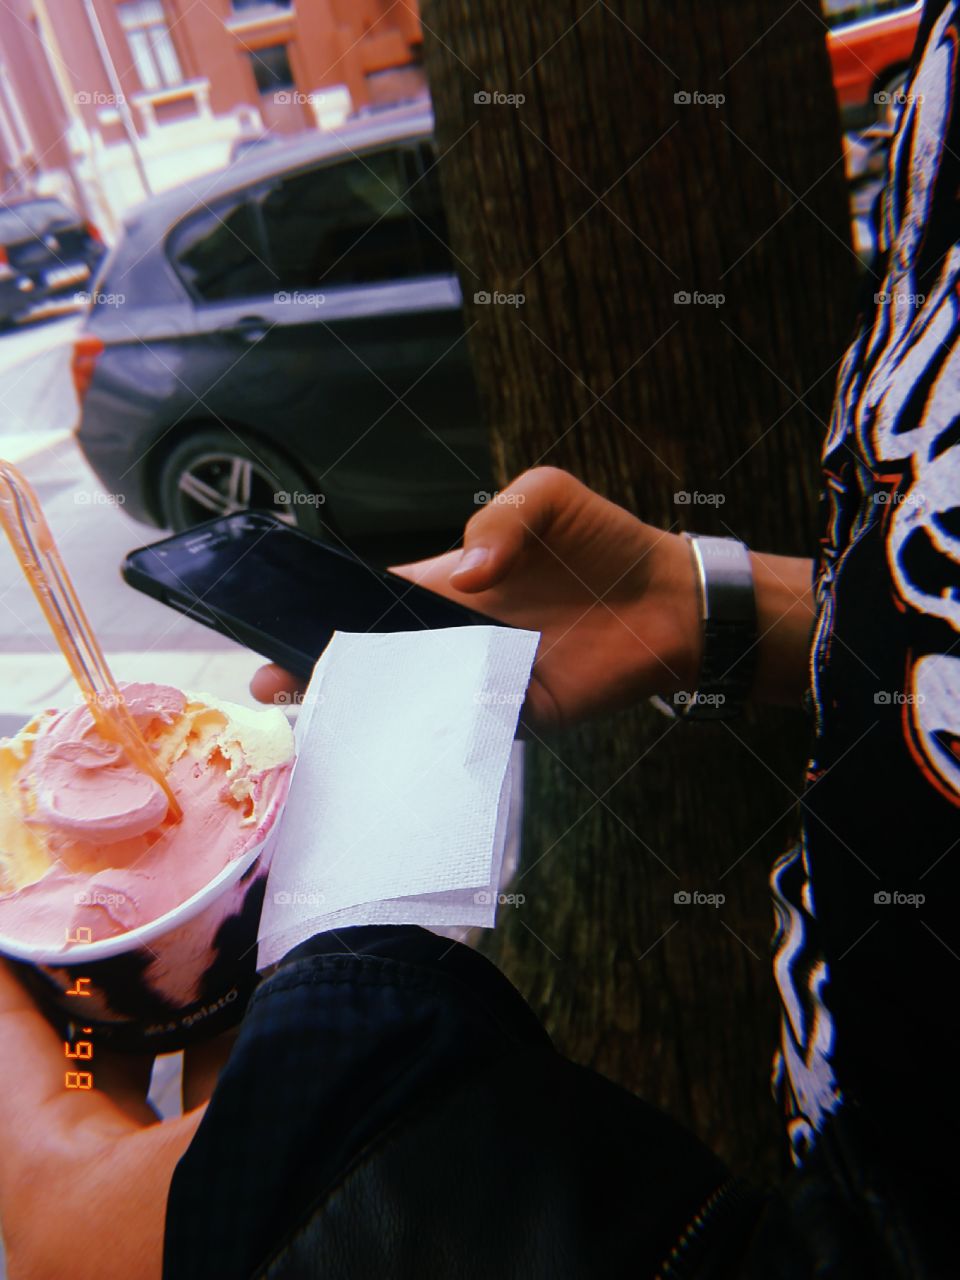 An ice cream in cold days is crazy 🤘